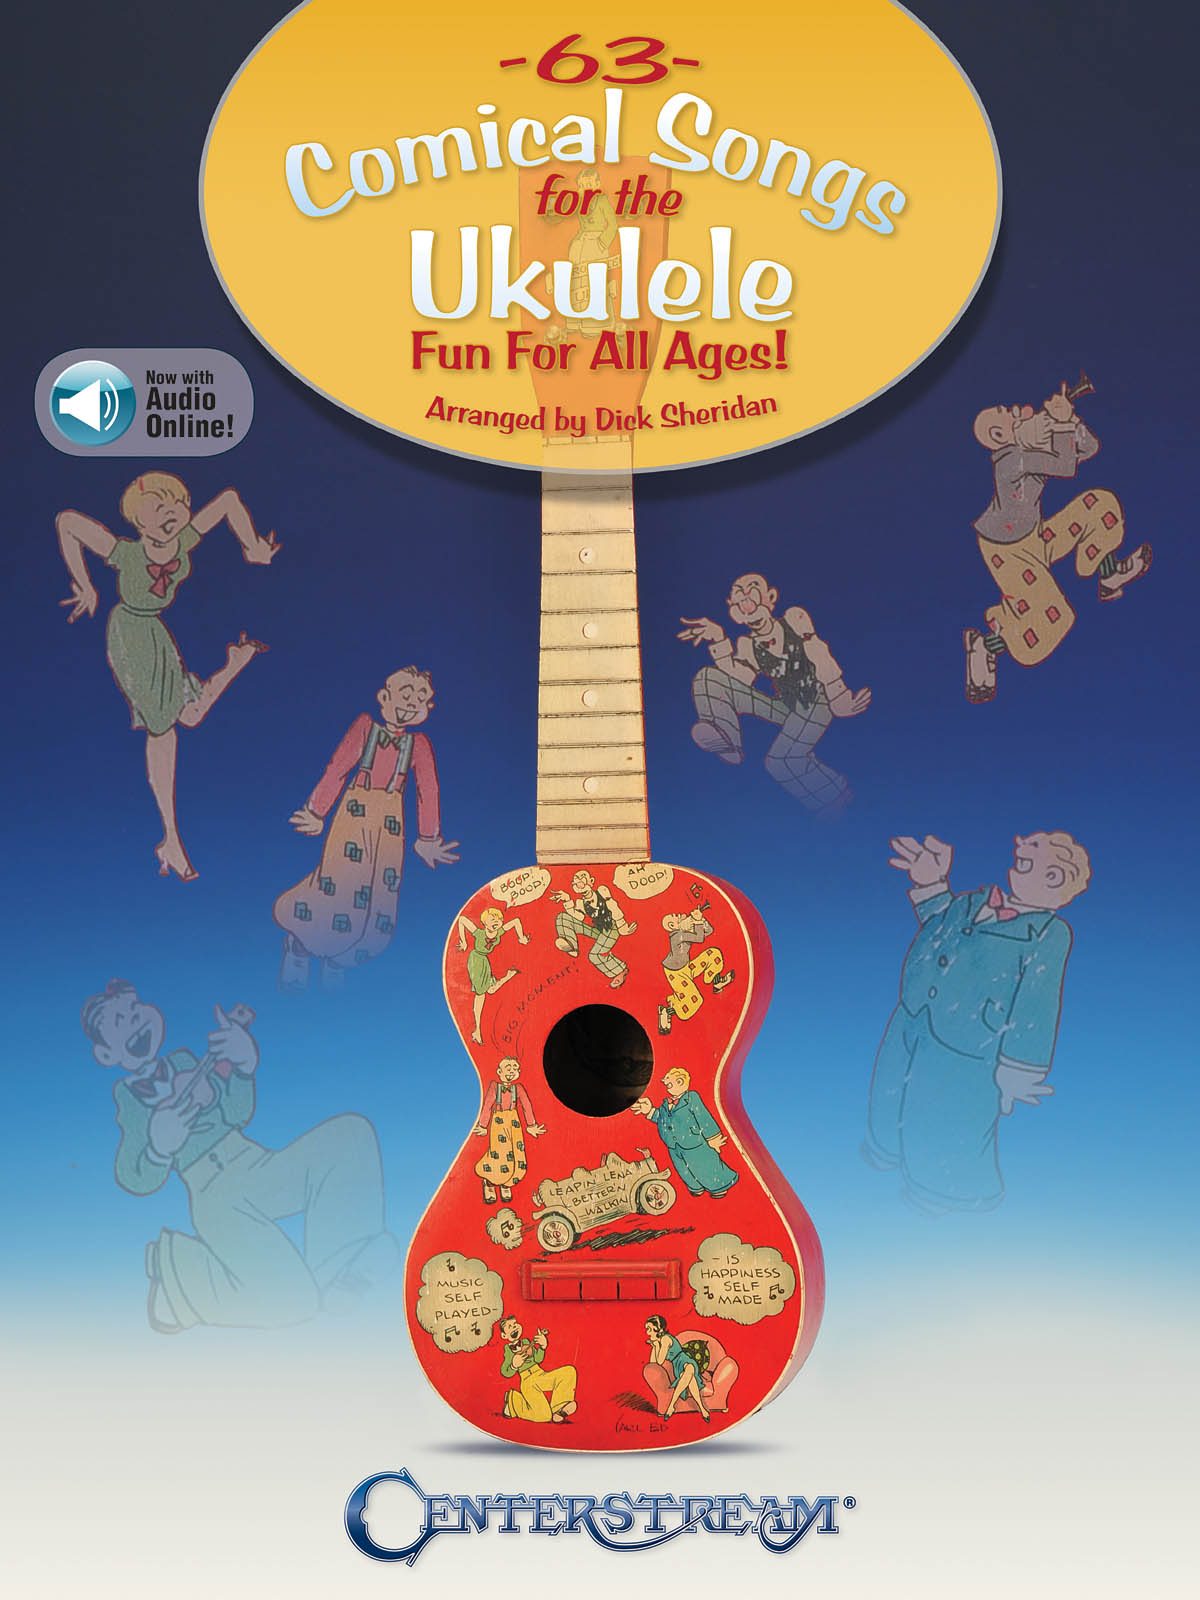 63 Comical Songs for the Ukulele - Fun for All Ages! písně pro ukulele